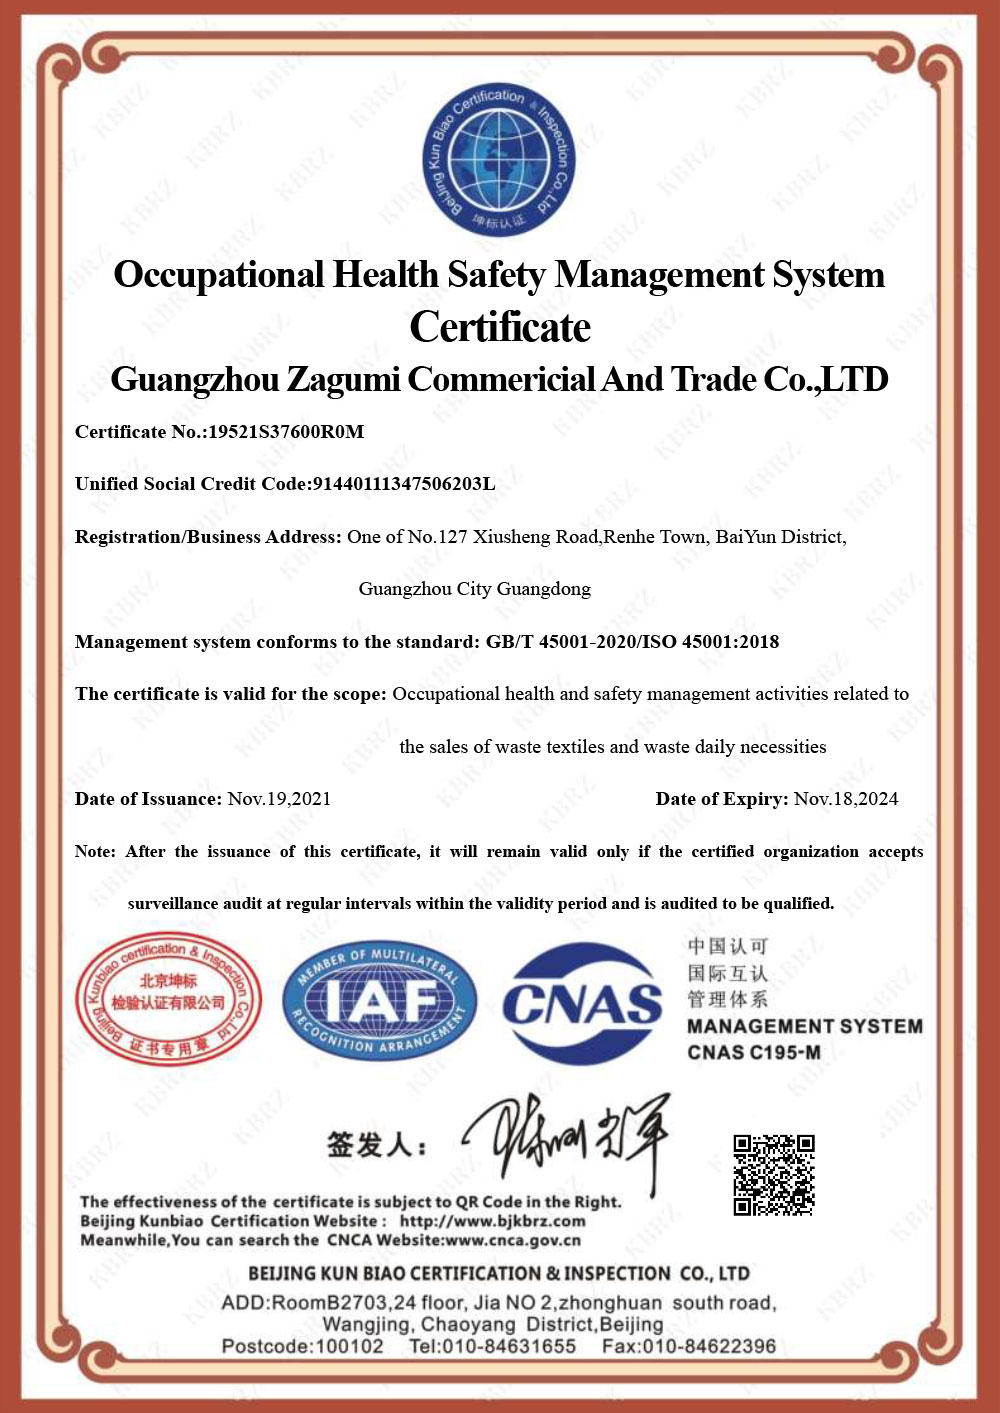 Occupational health safety management system